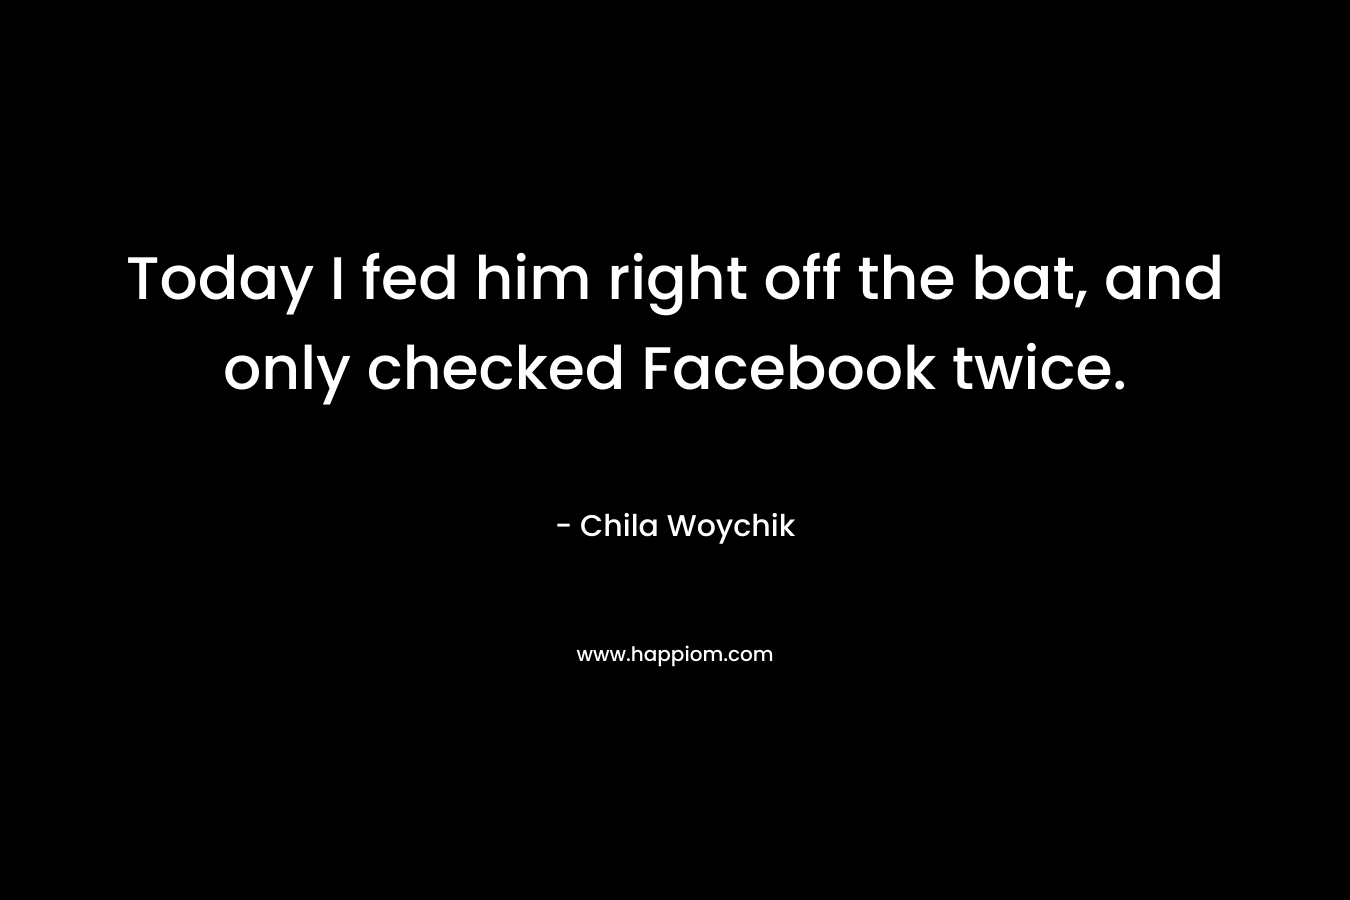 Today I fed him right off the bat, and only checked Facebook twice.